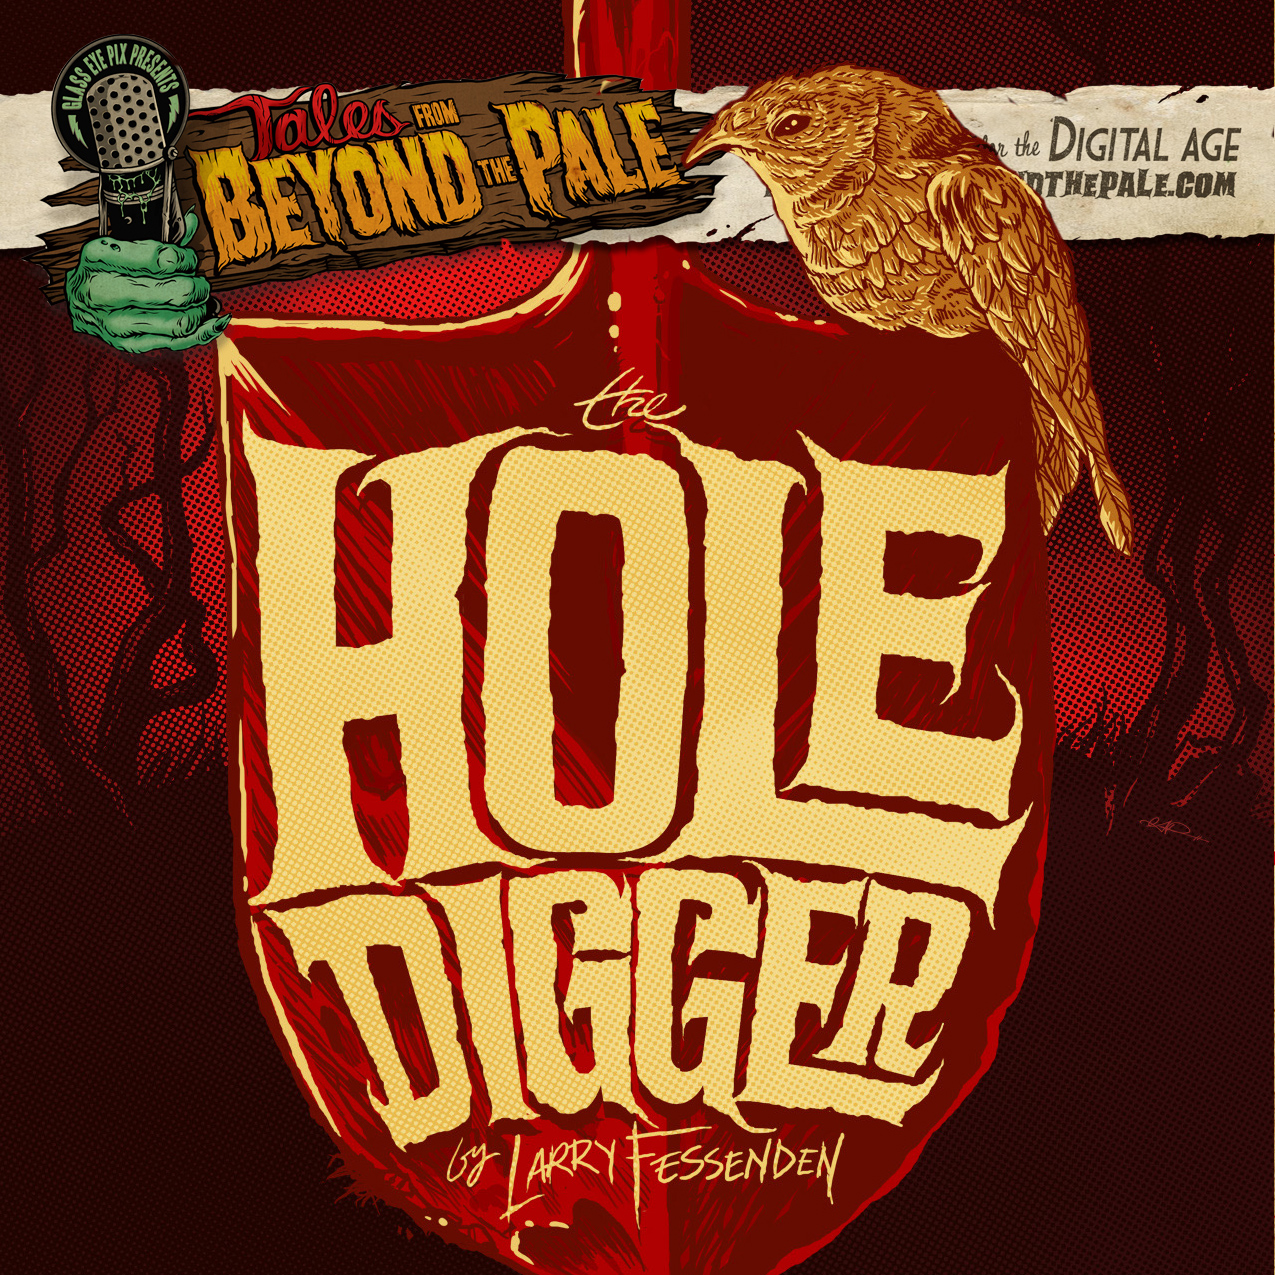 Episode 40: The Hole Digger